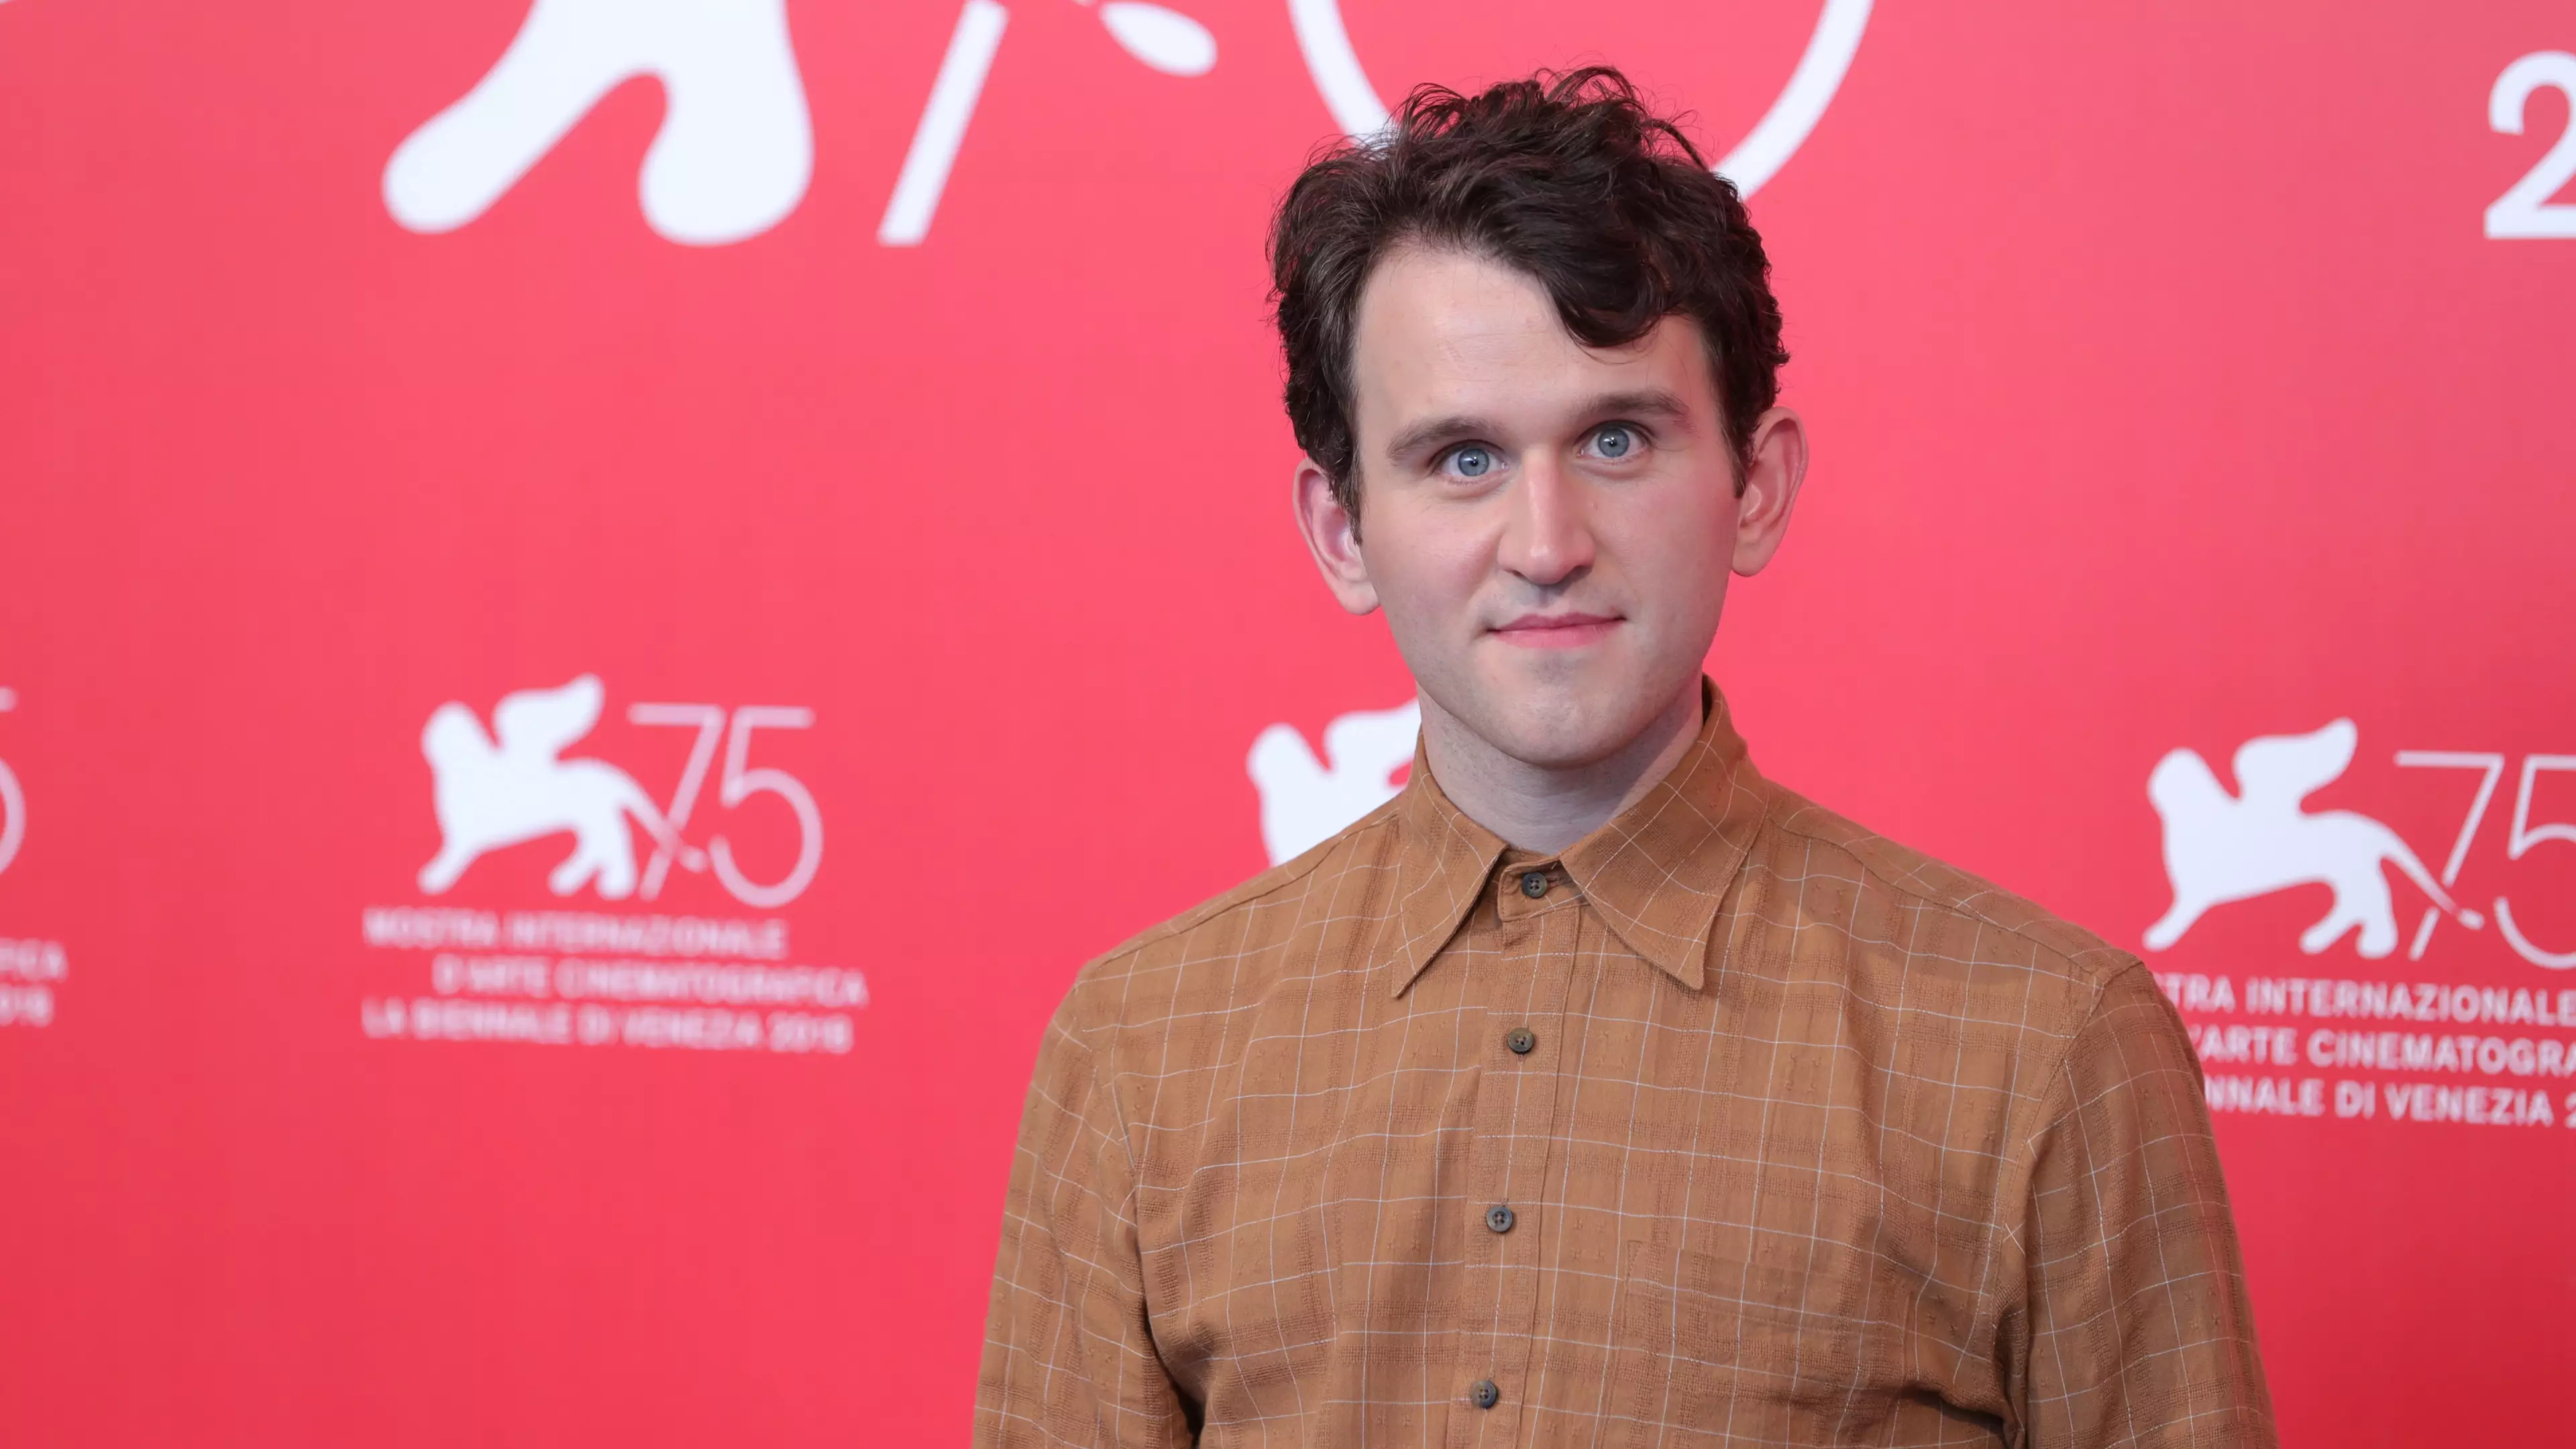 Harry Potter’s Dudley Dursley Looks Totally Different As He Stars In New Netflix Movie